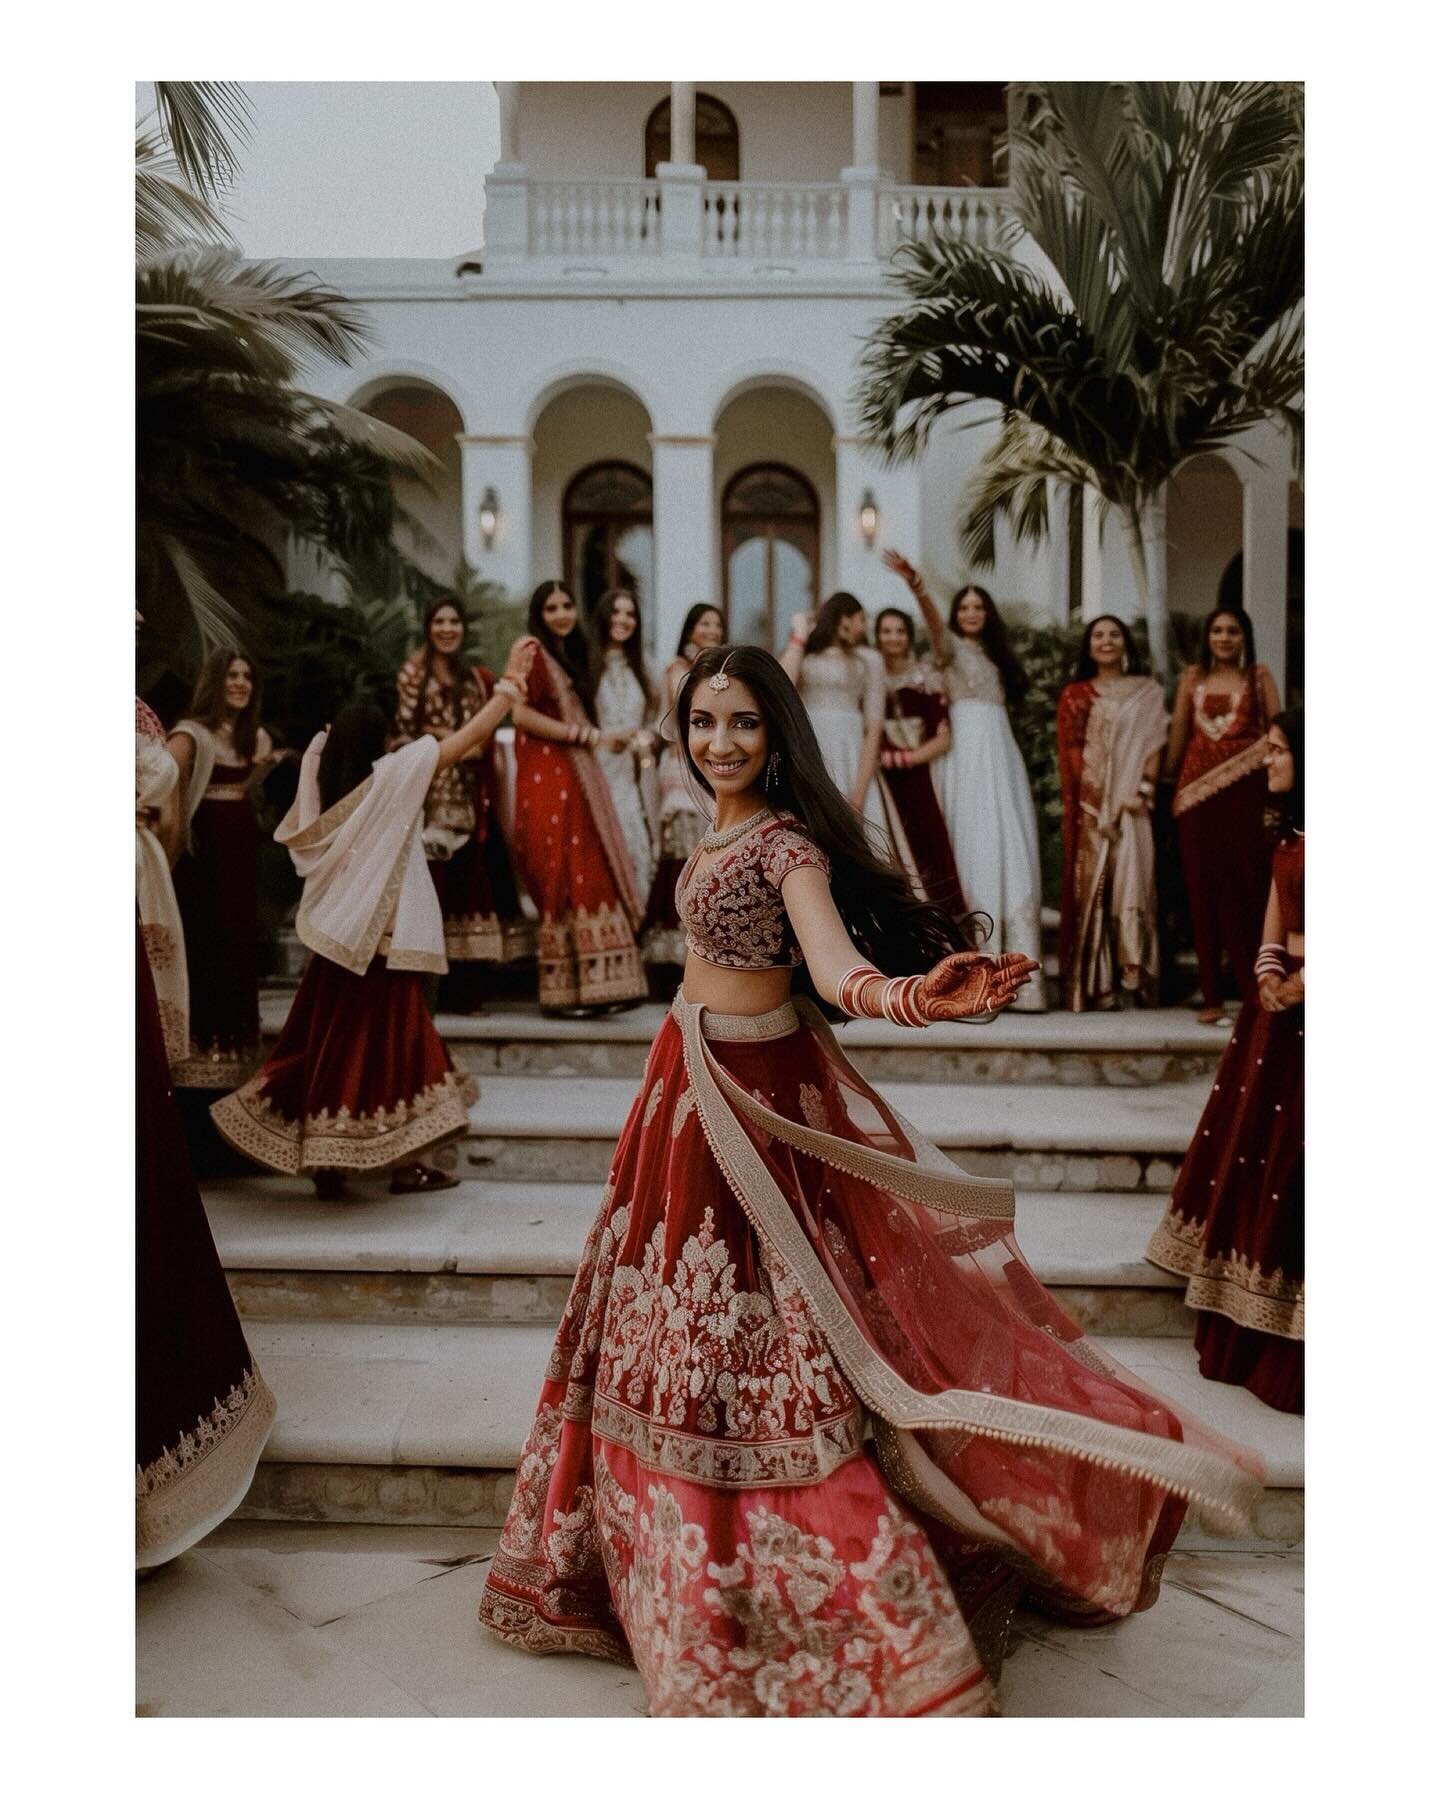 //Currently// springing into the new week likeeee 💃🏽

I capture so many moments in a wedding and only share the highlights but I&rsquo;m trying to share more of these magical in between moments as well this year. Let me know what you think about th